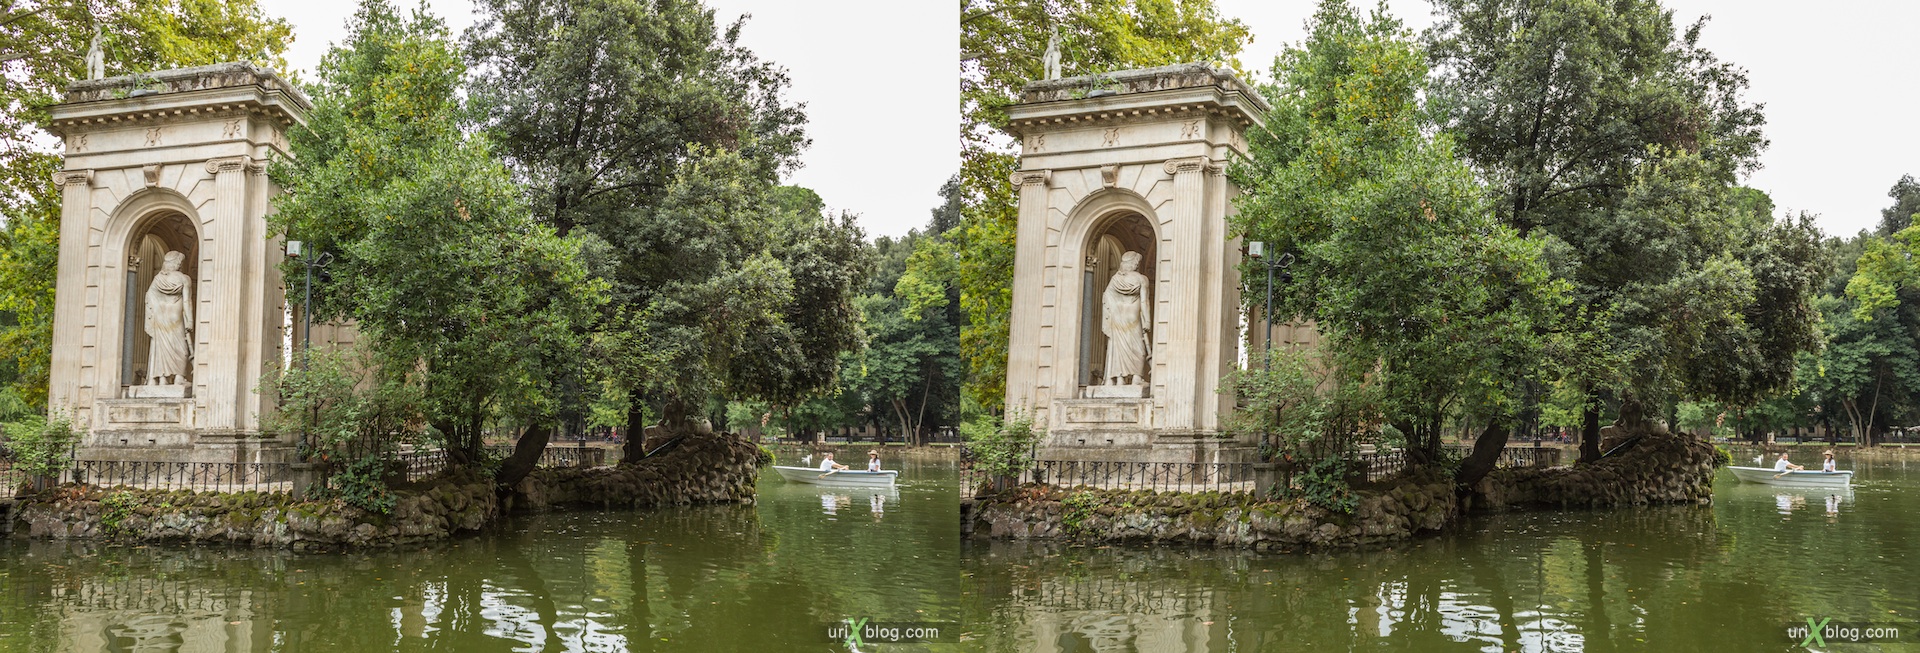 2012, park villa Borghese, Rome, Italy, 3D, stereo pair, cross-eyed, crossview, cross view stereo pair